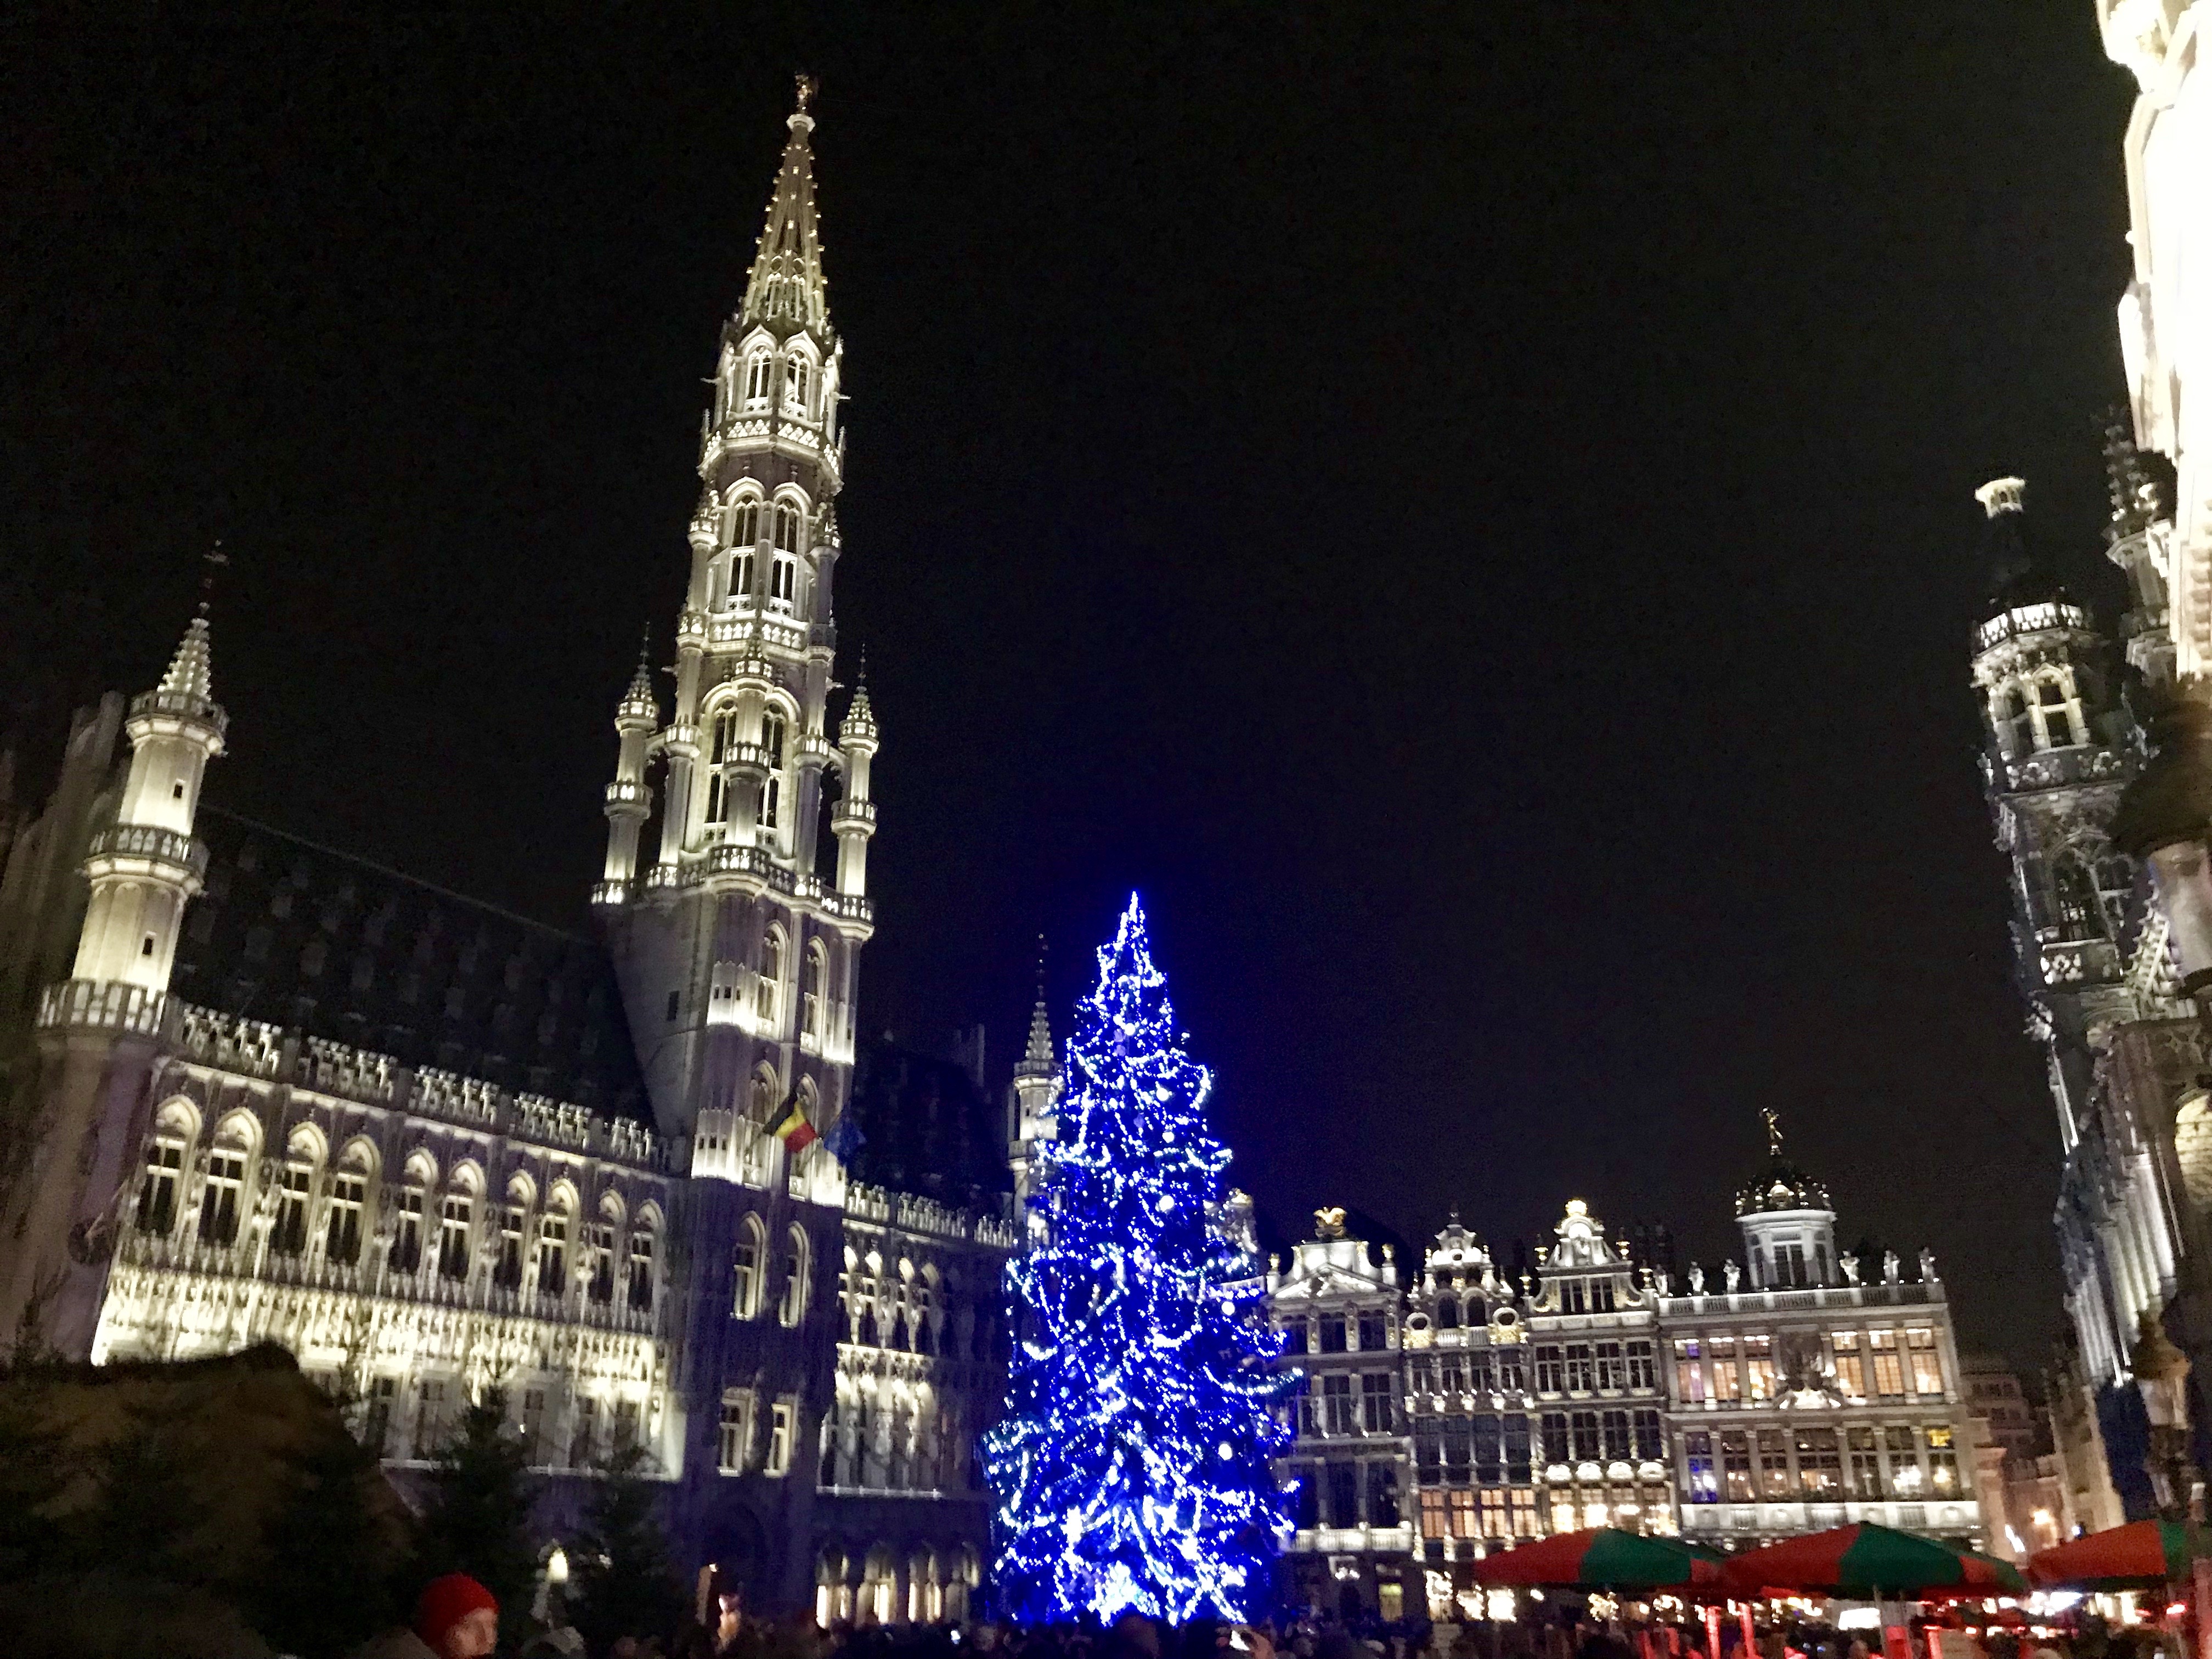 Brussels Market Square during a Christmas market in Belgium!